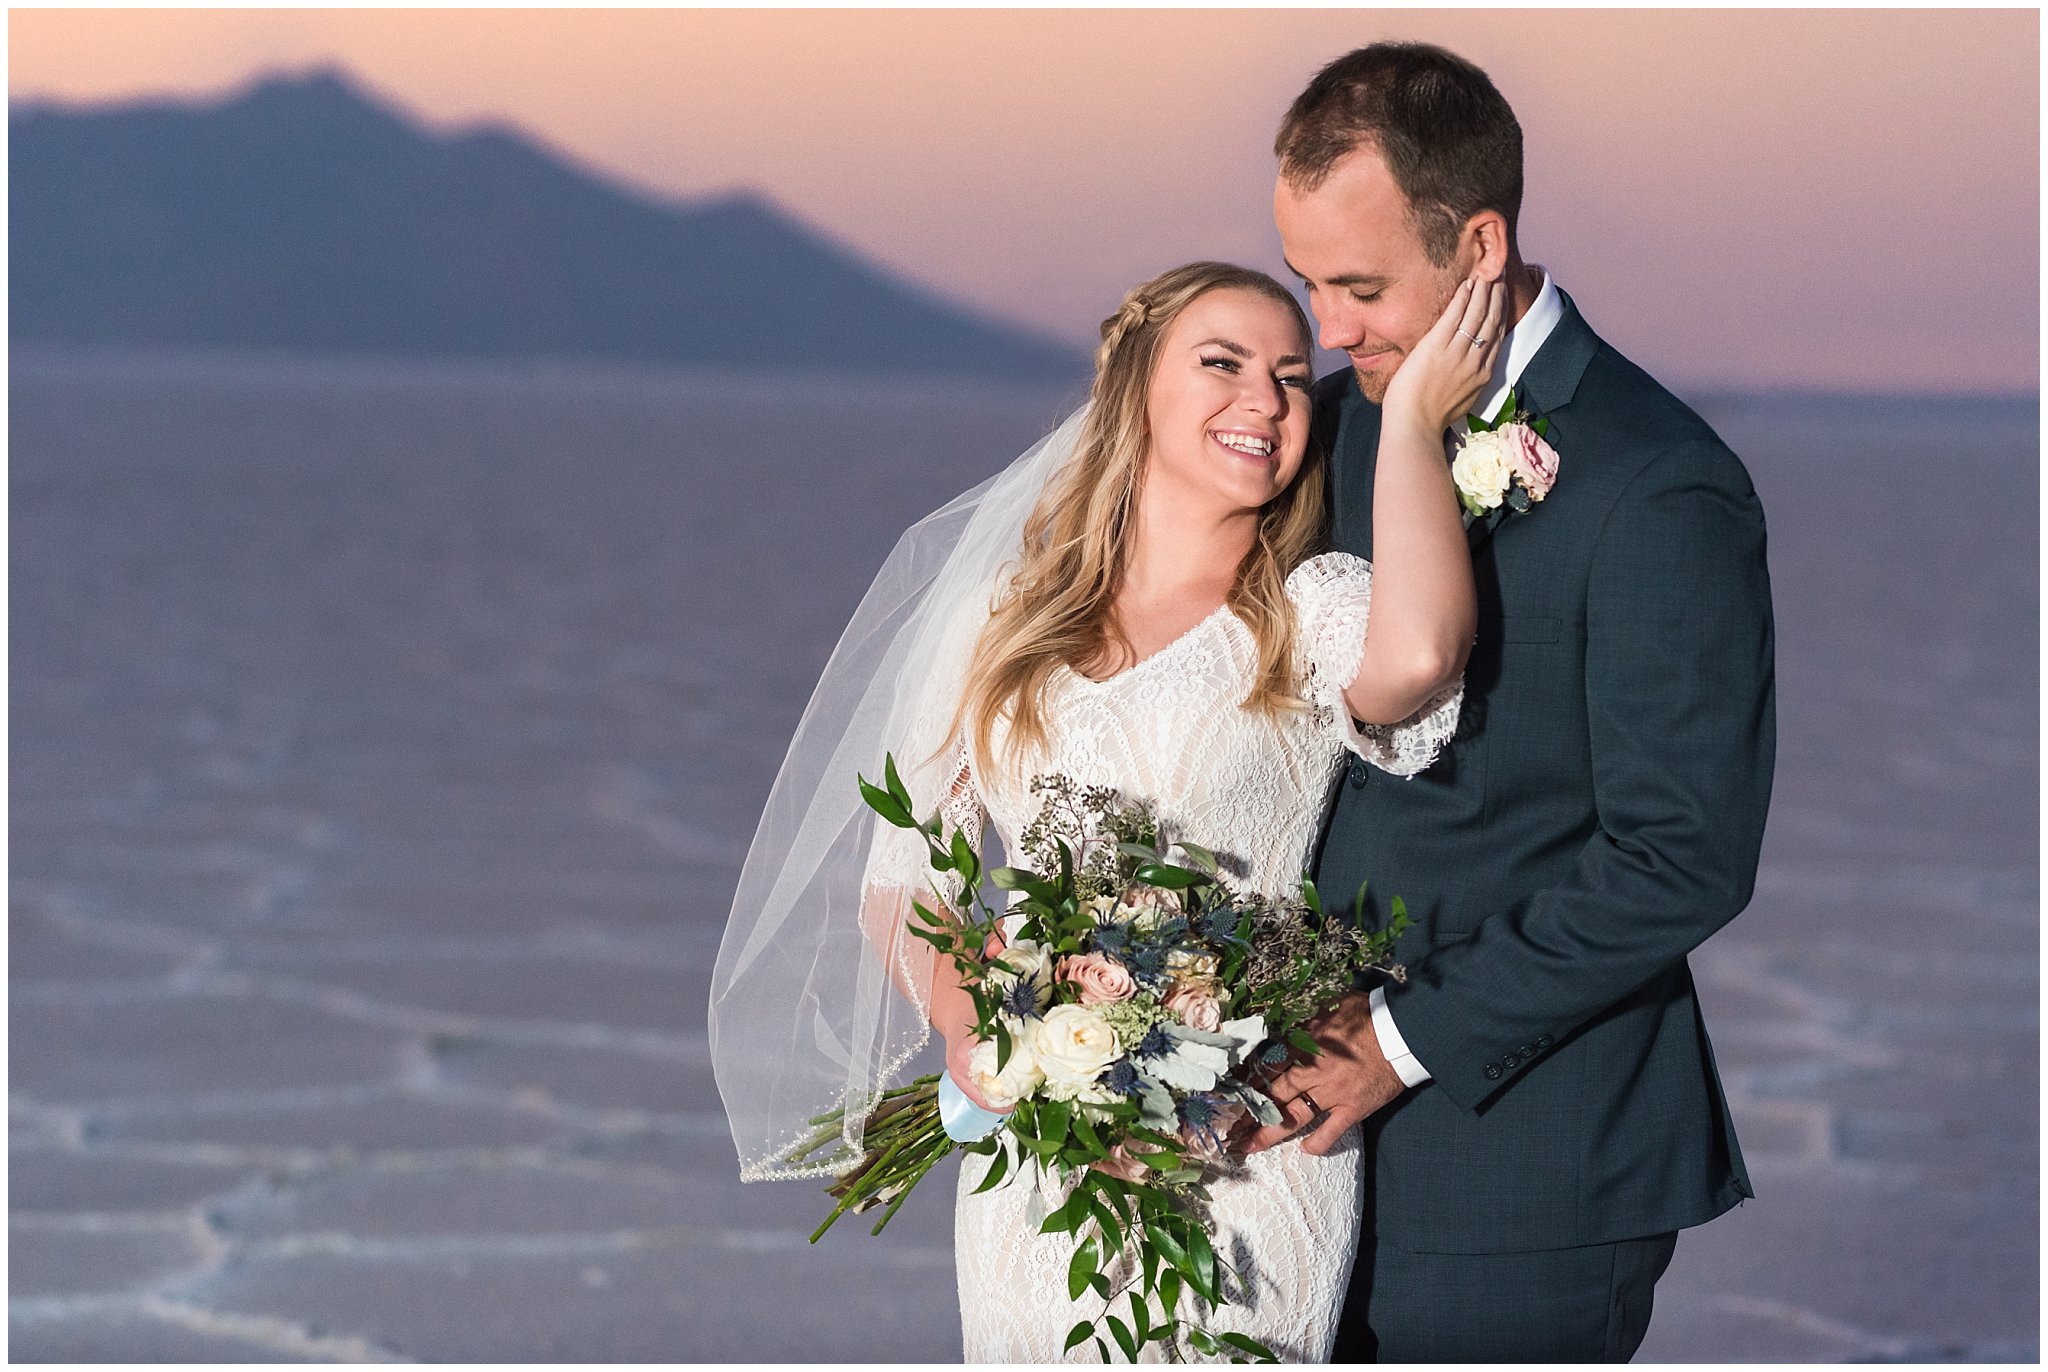 Bride and Groom at sunset in lace detail dress and blue suit for Adventure Session | Bonneville Salt Flats Sunset Wedding Formal Session | Jessie and Dallin Photography